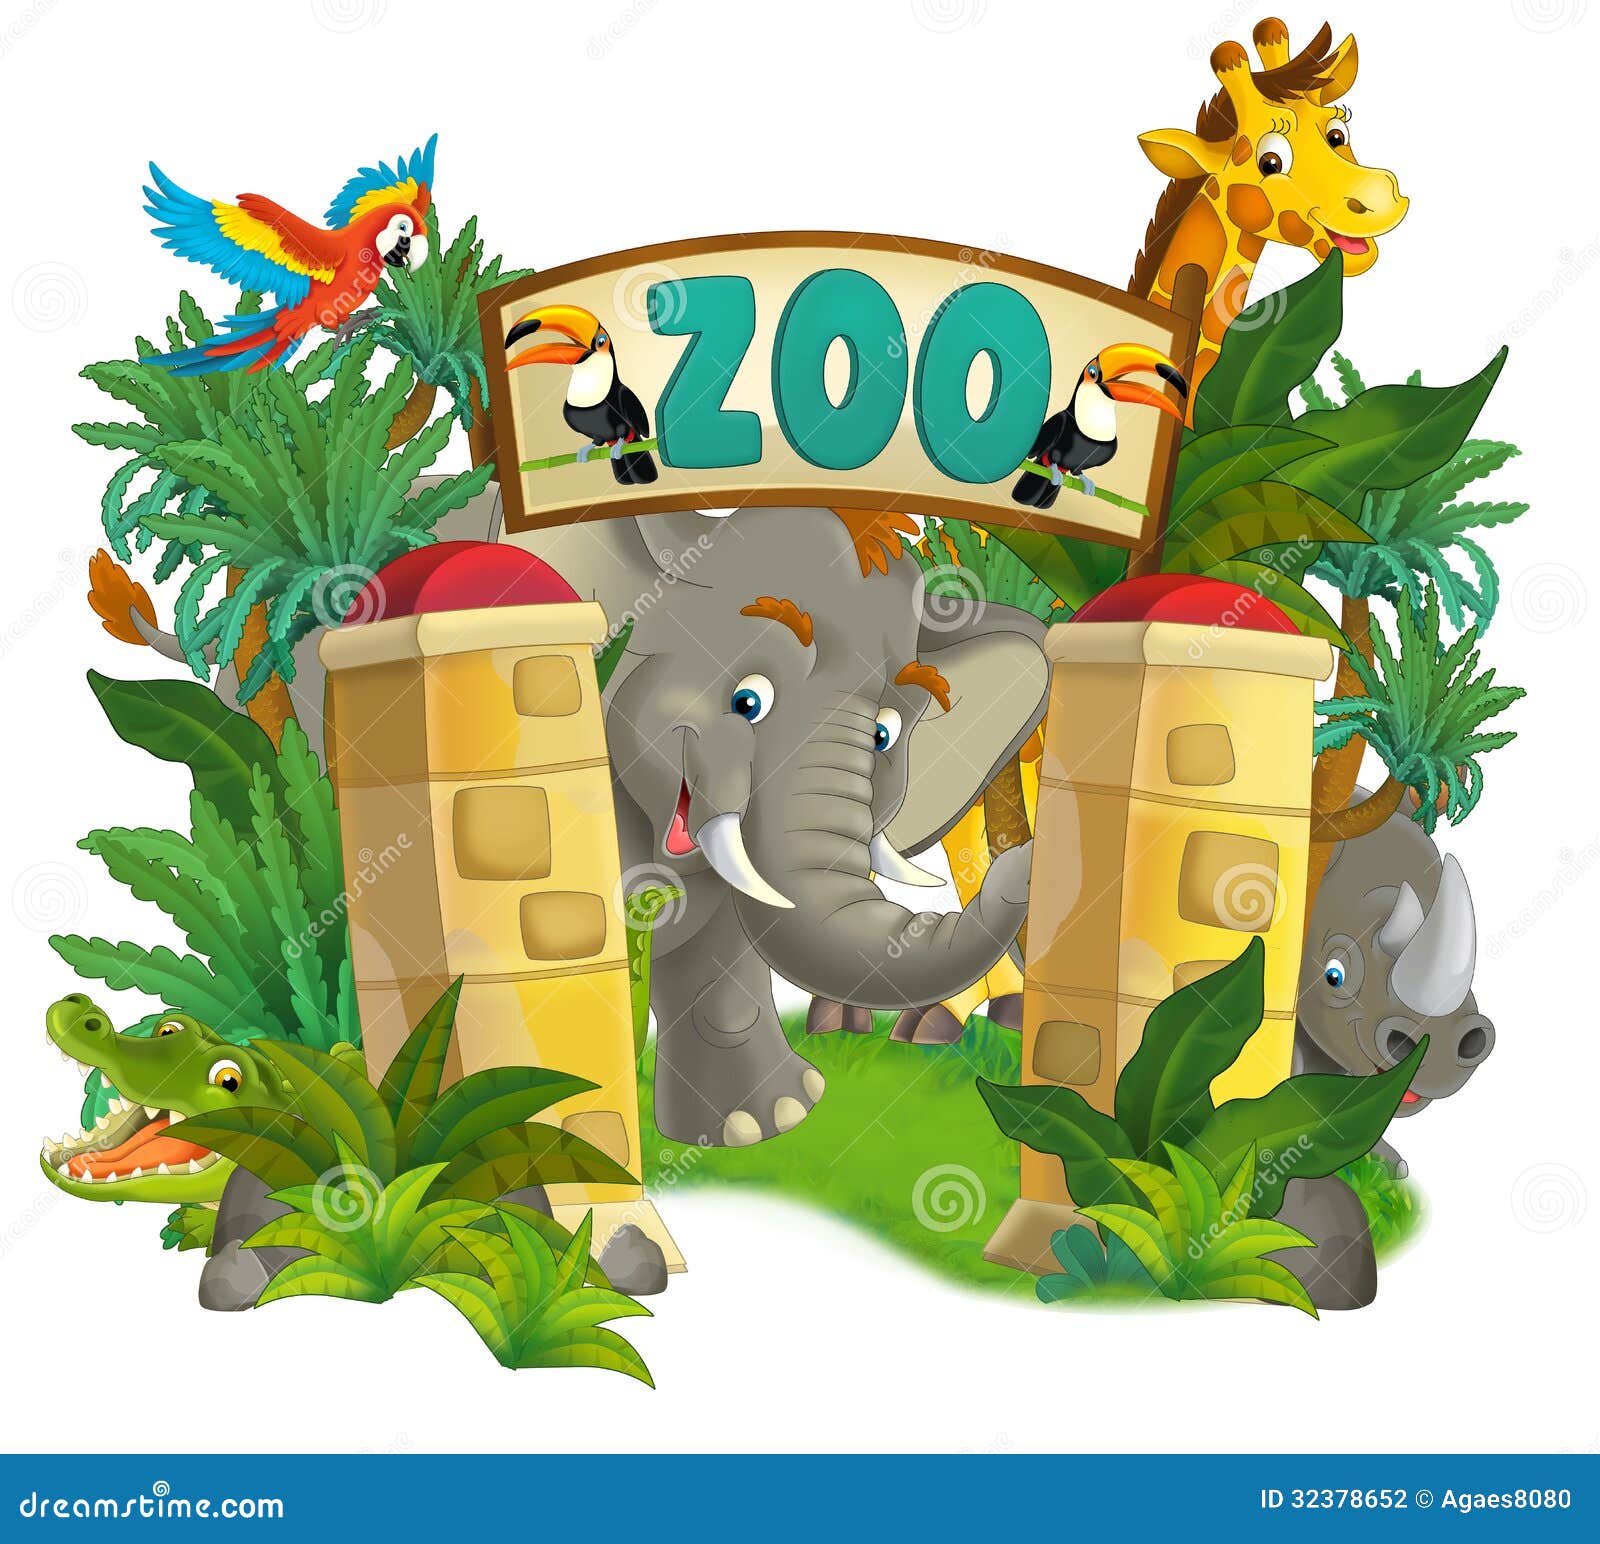 zoo map clipart - photo #36